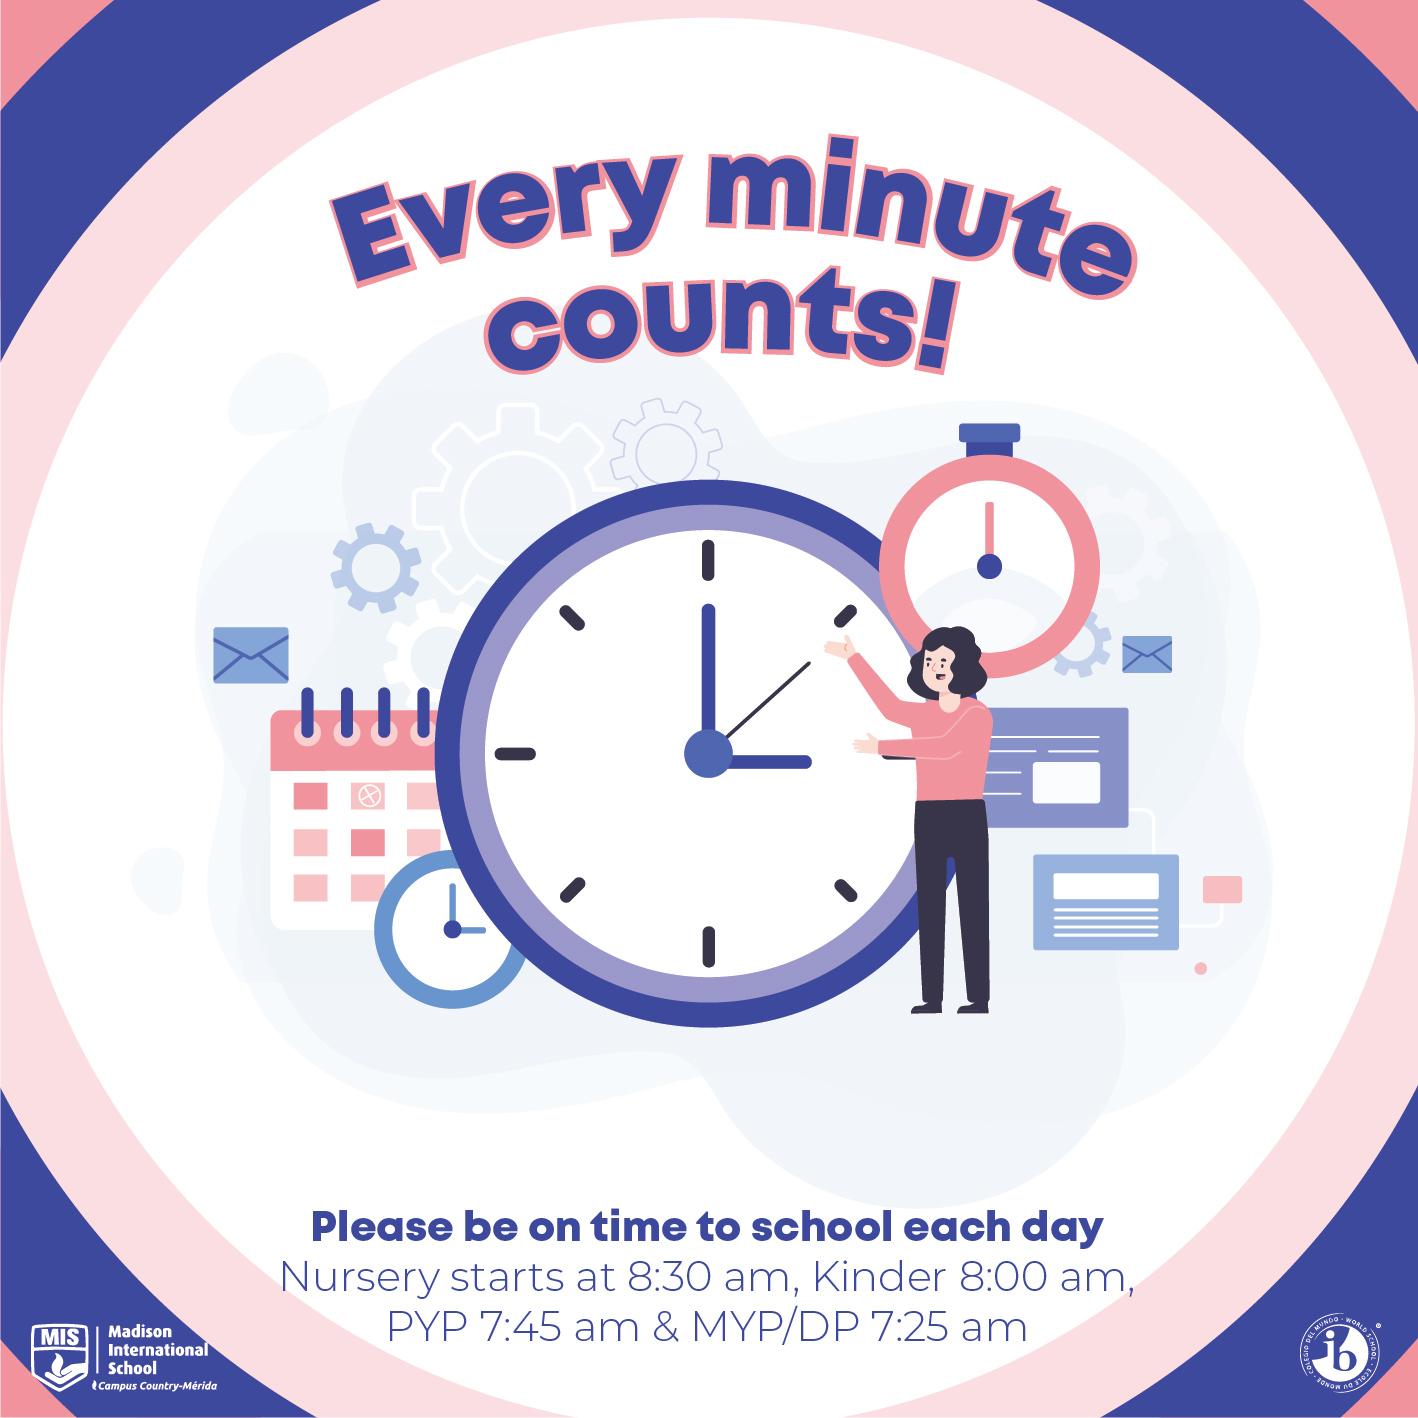 every minute counts!